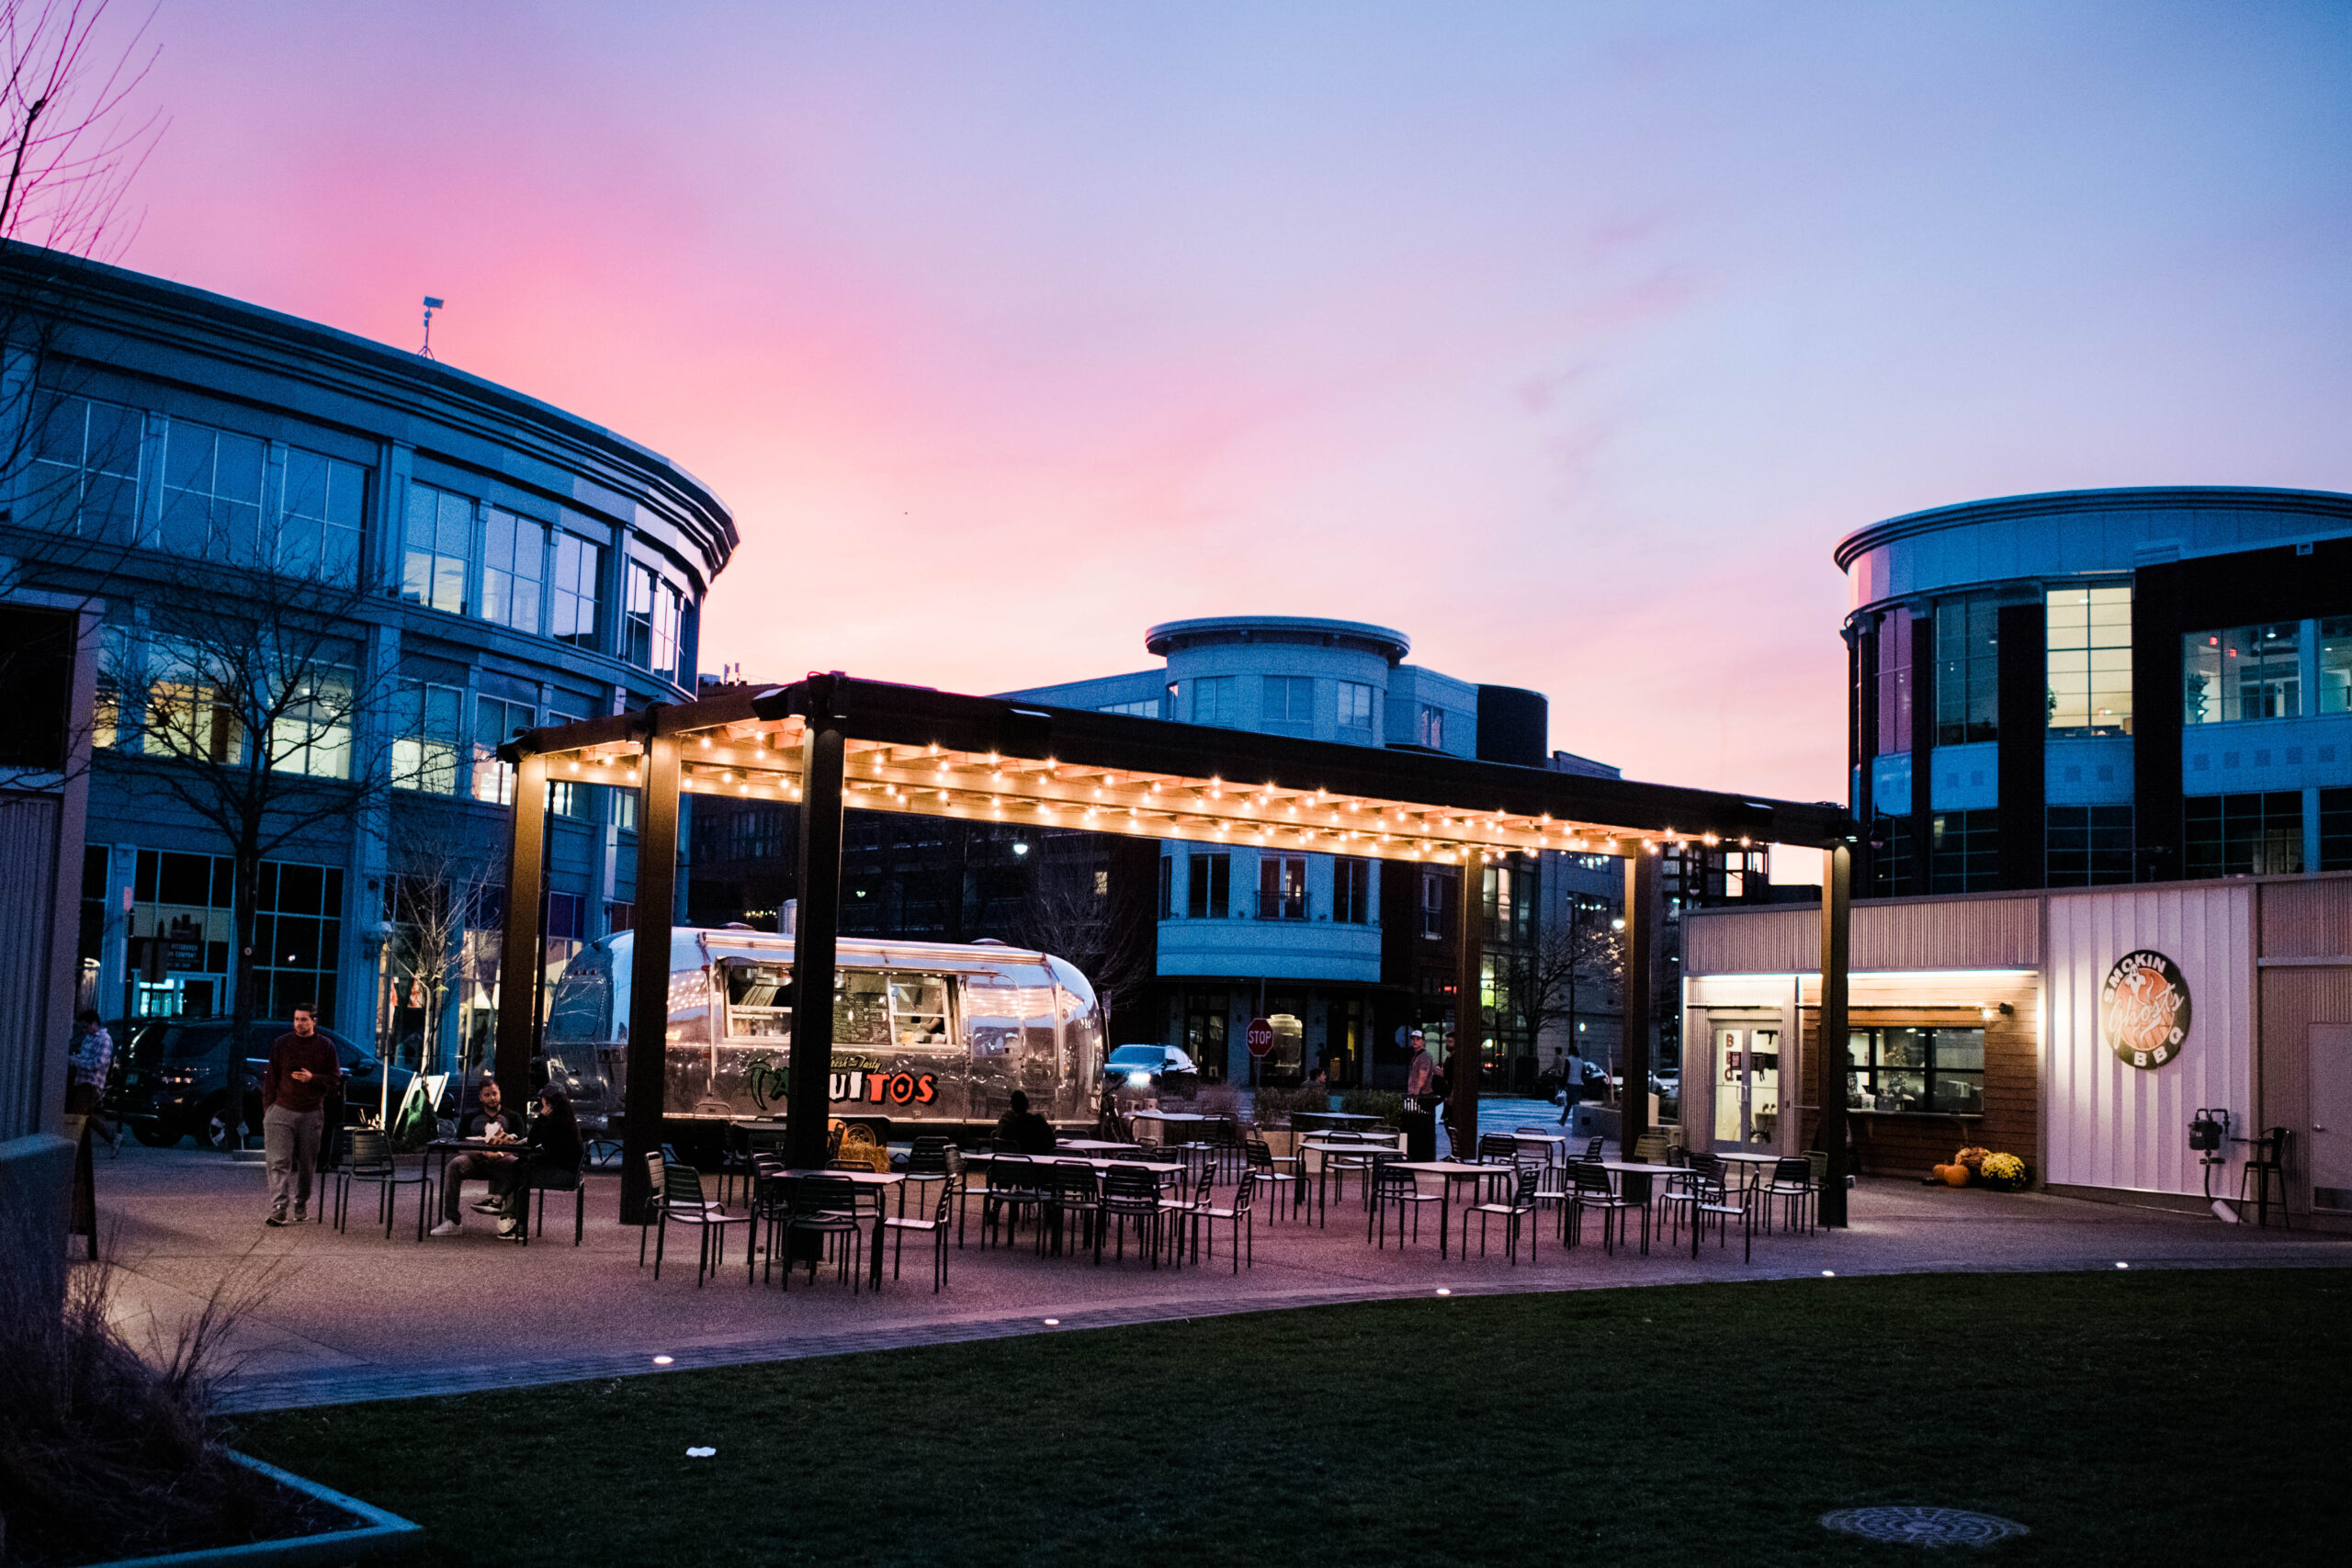 A photo at Sunset of outdoor dining at South Side Works.